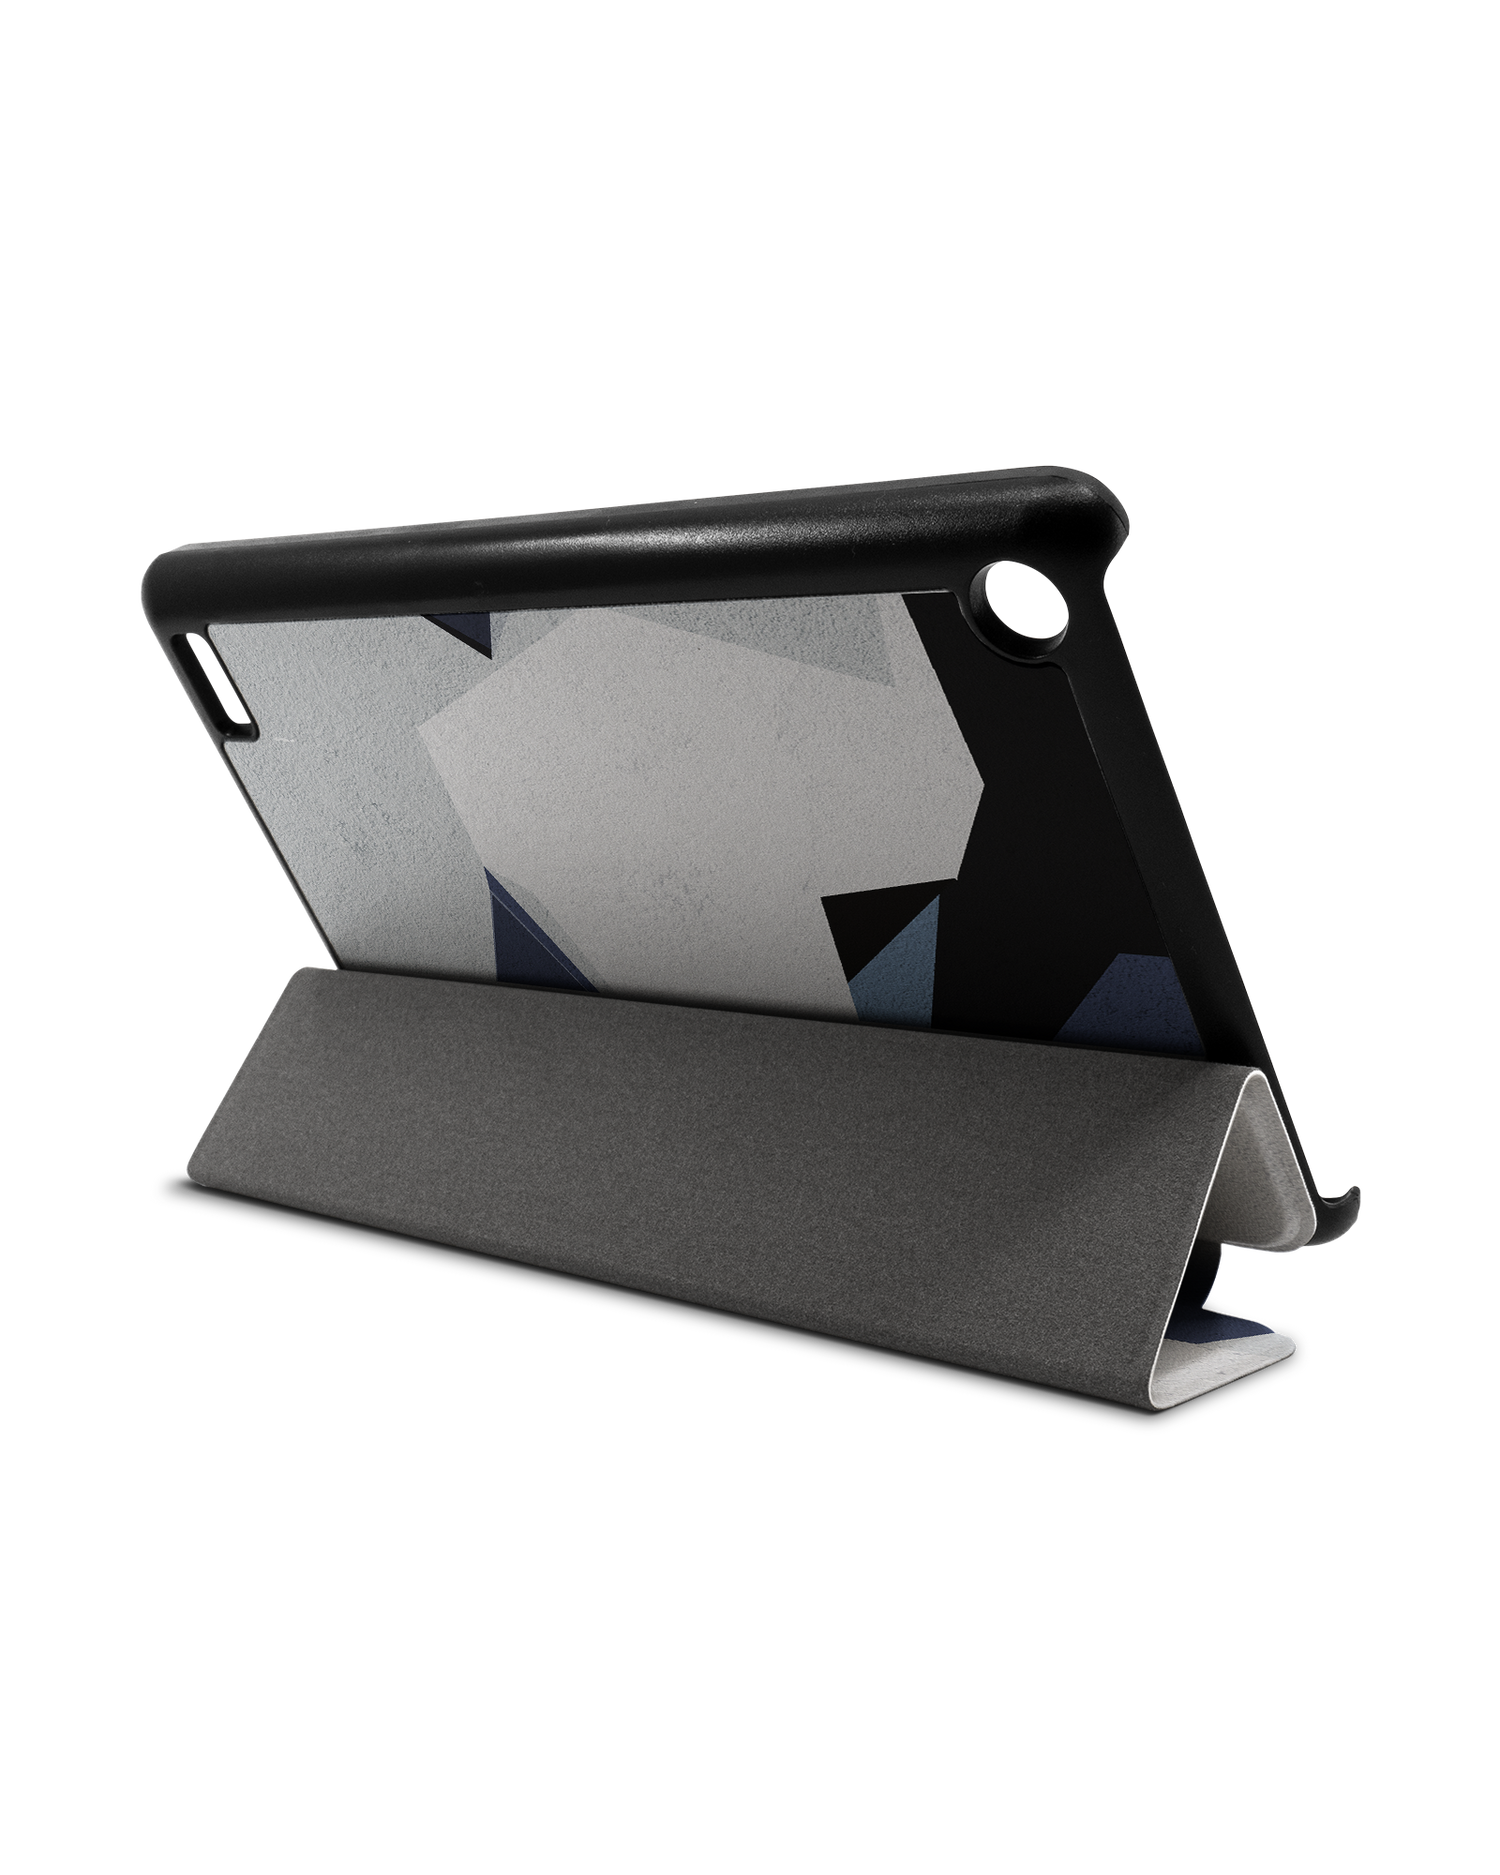 Geometric Camo Blue Tablet Smart Case for Amazon Fire 7: Used as Stand